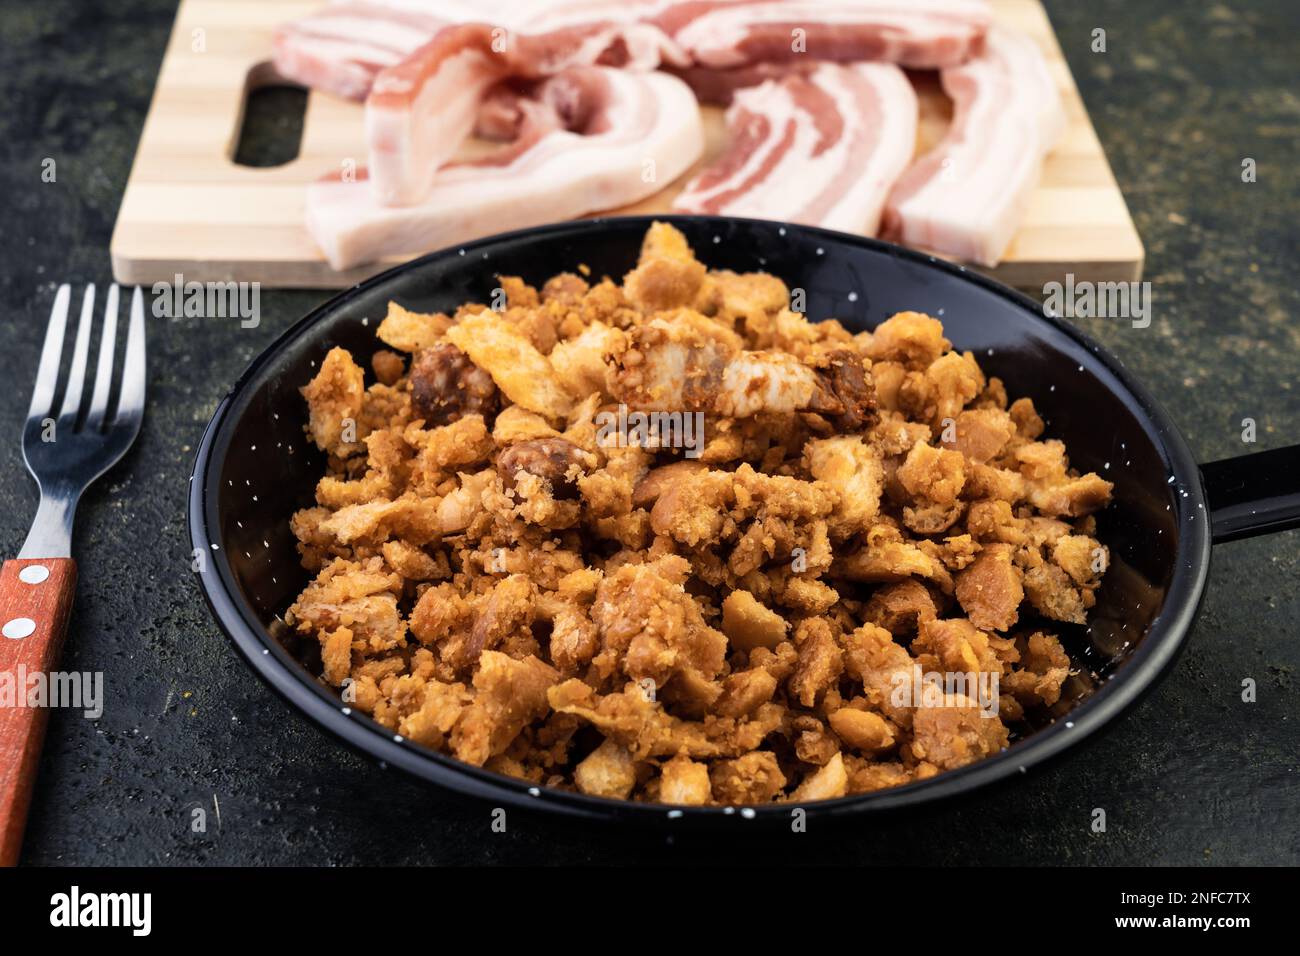 A close-up image of a kitchen counter top with cooked strips of bacon, mushrooms, and other meats, arranged on a cutting board Stock Photo